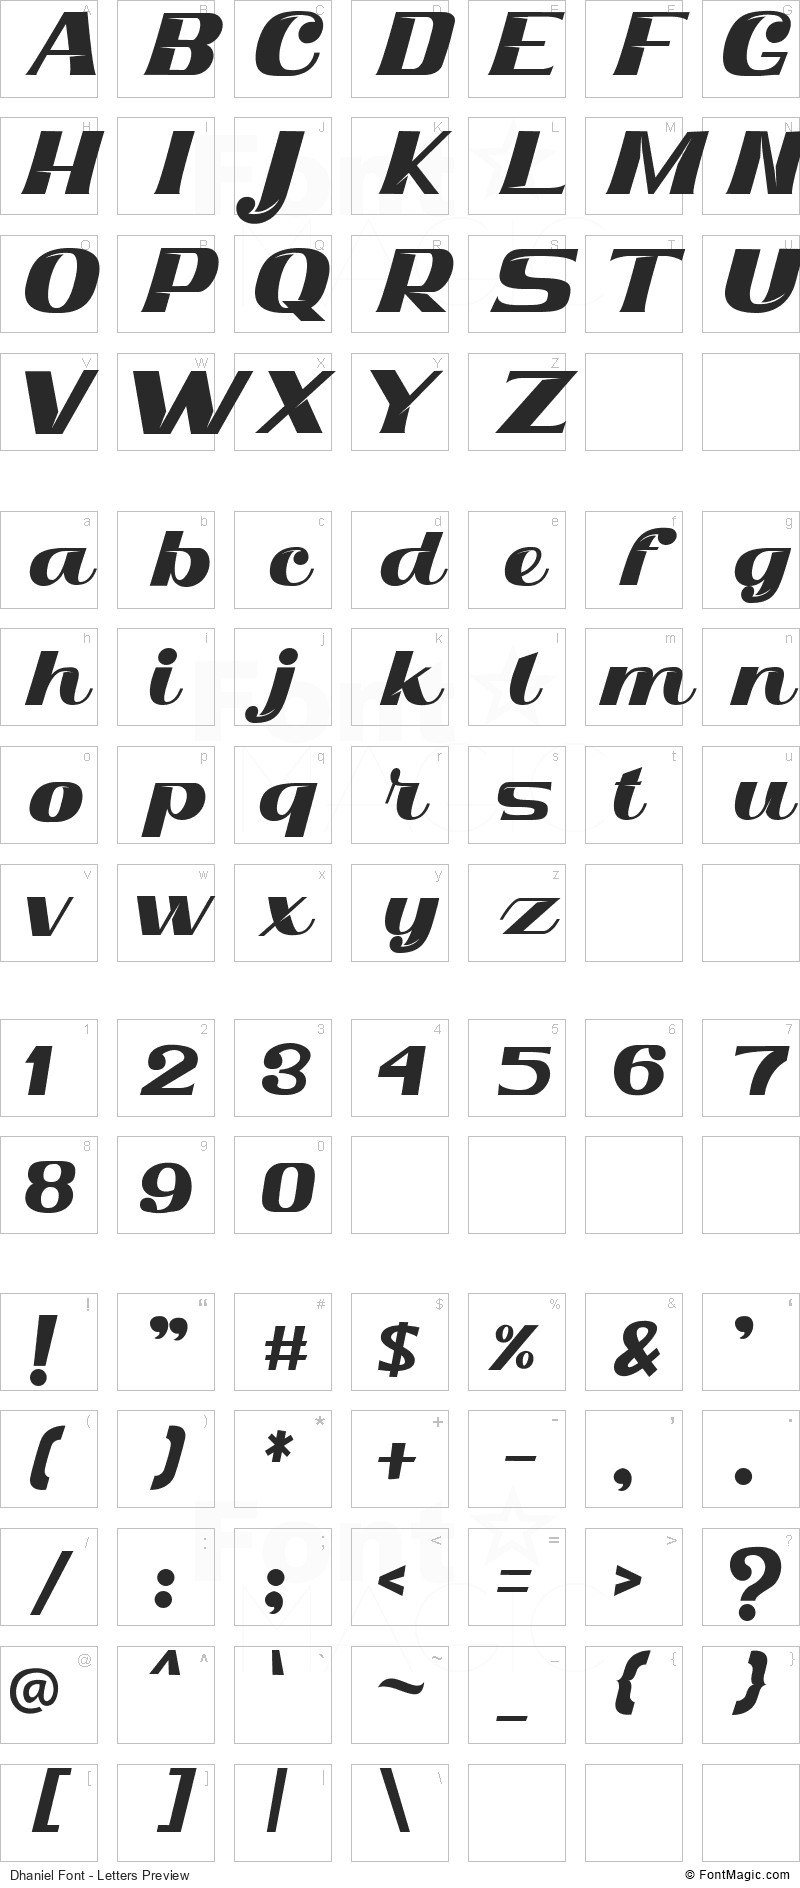 Dhaniel Font - All Latters Preview Chart